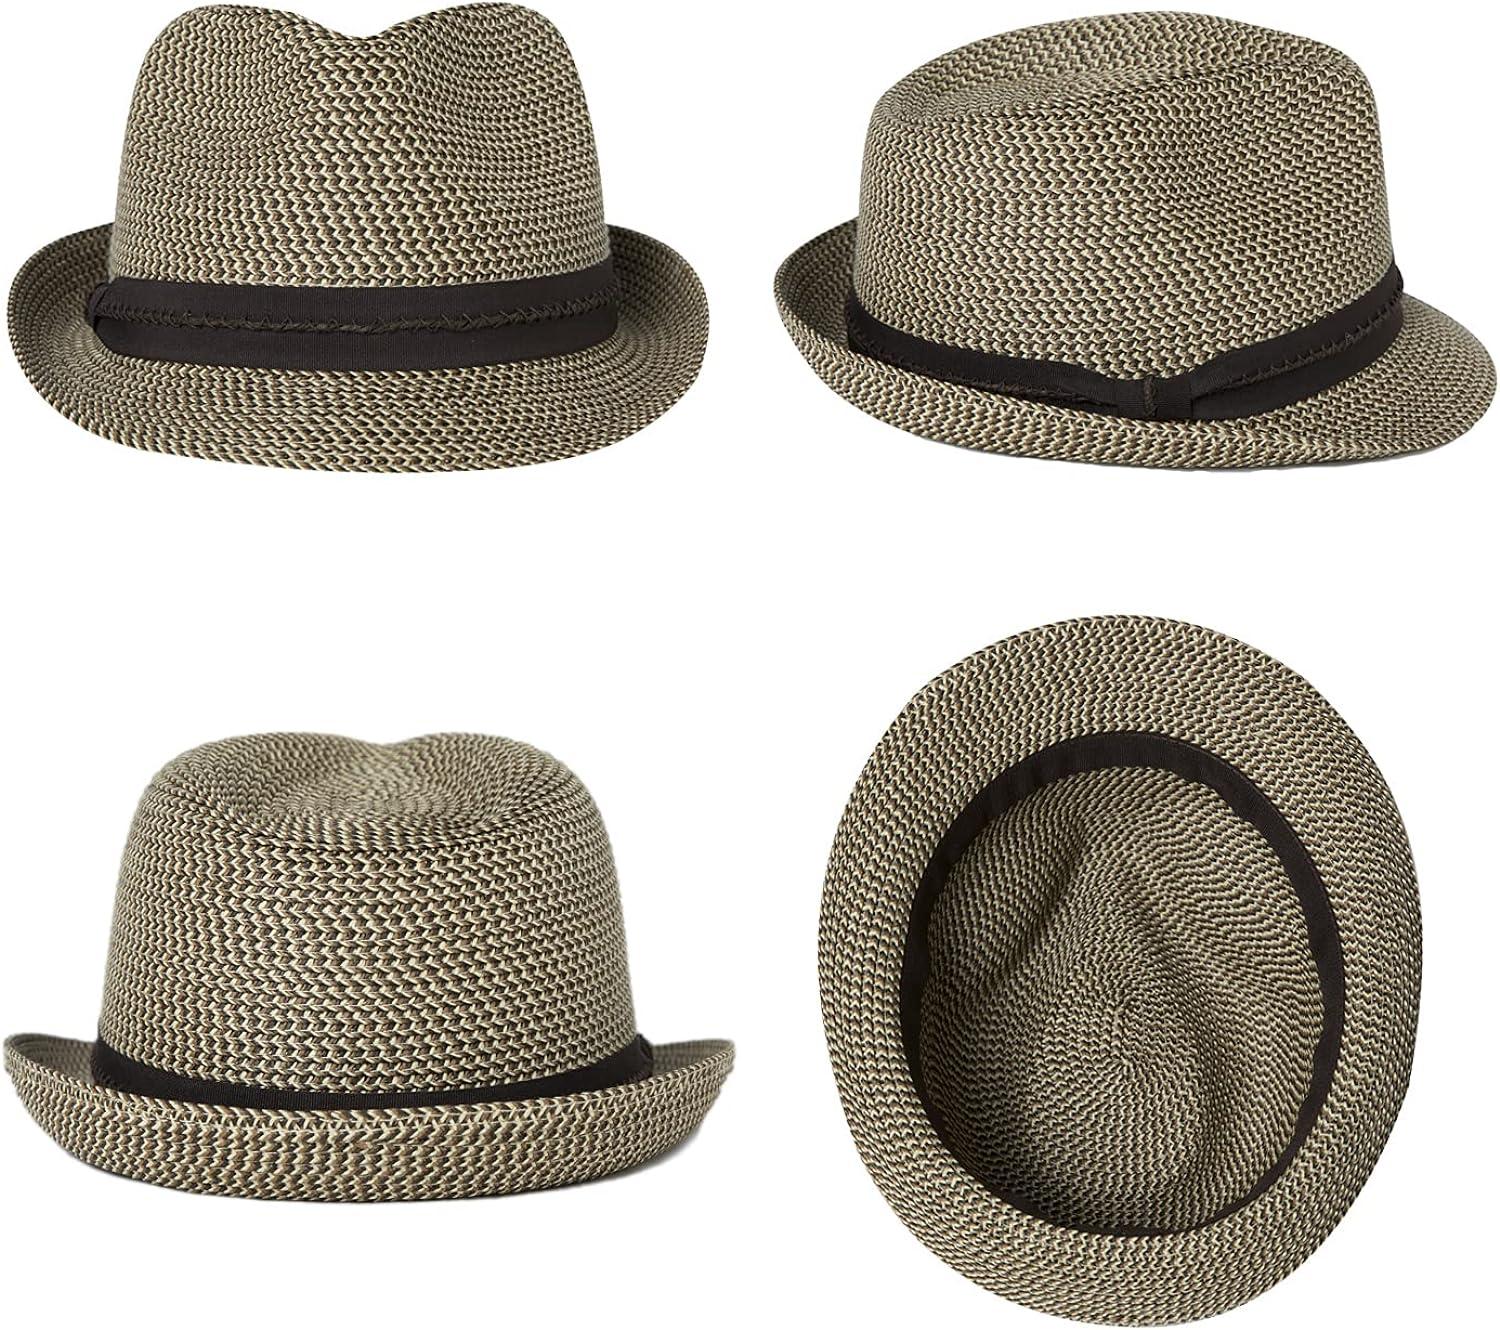 Fancet Packable Straw Fedora Panama Sun Summer Beach Colombia